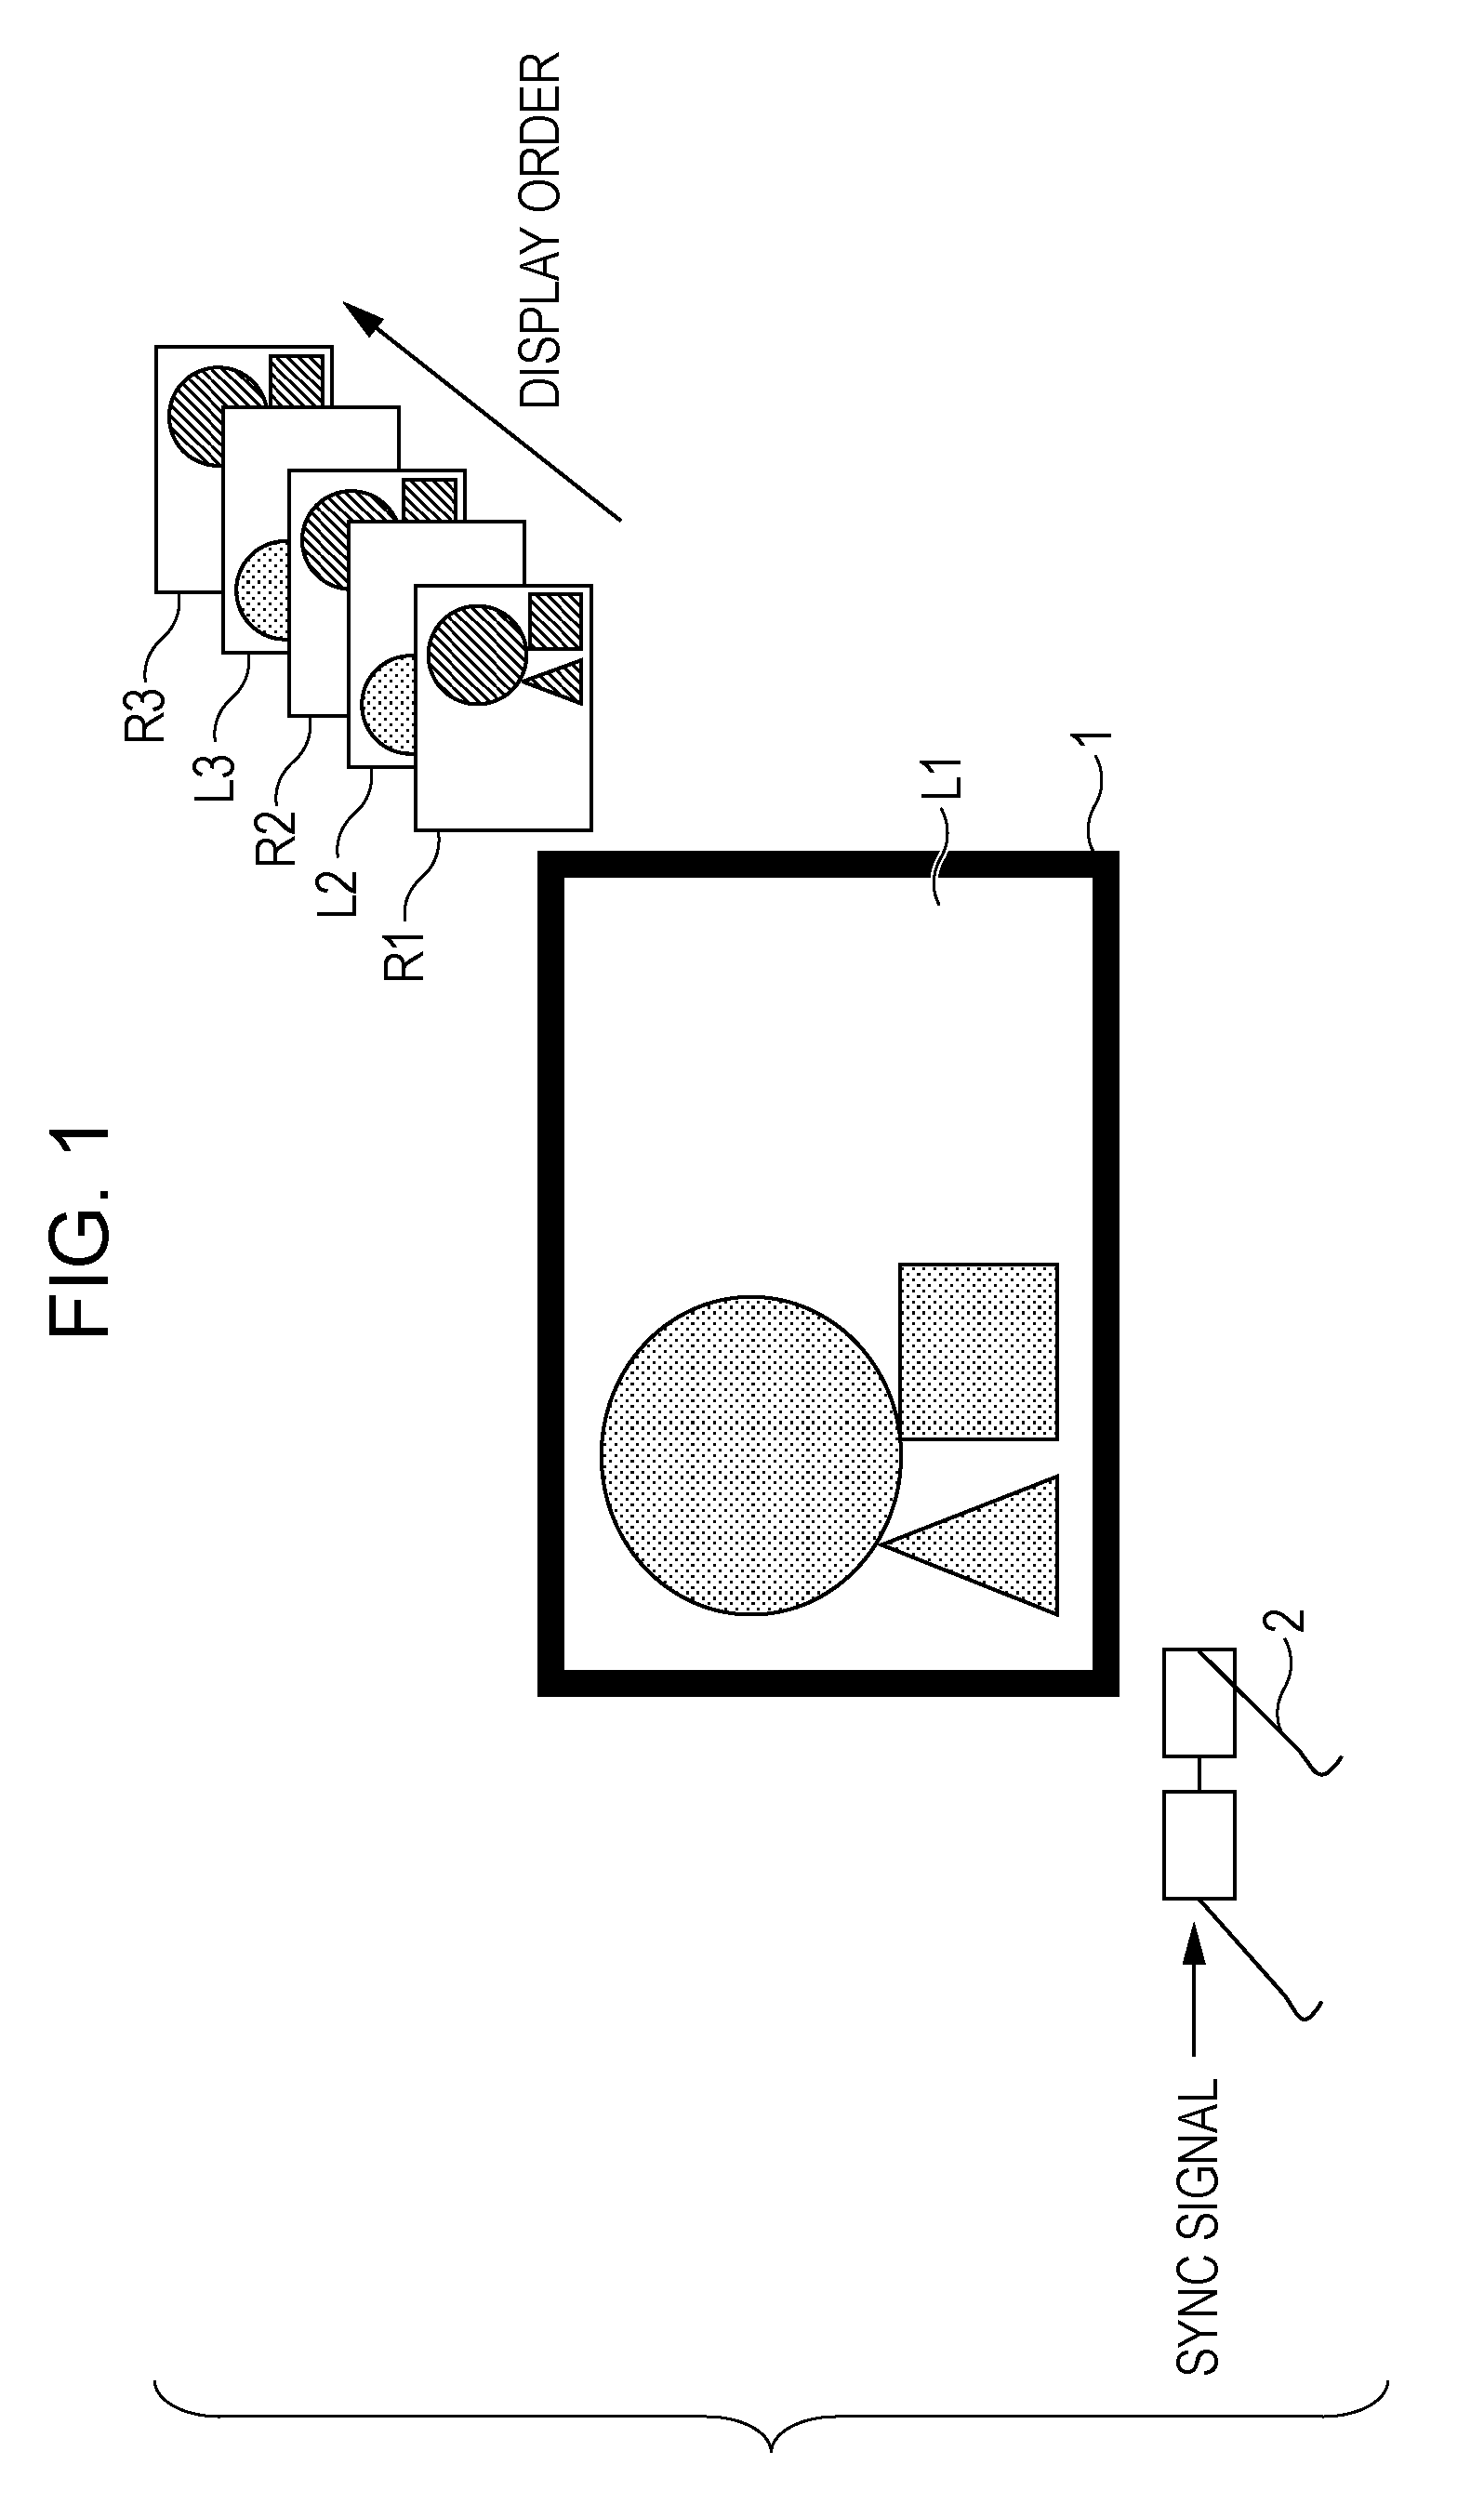 Synchronization circuits and methods usable in shutter glasses